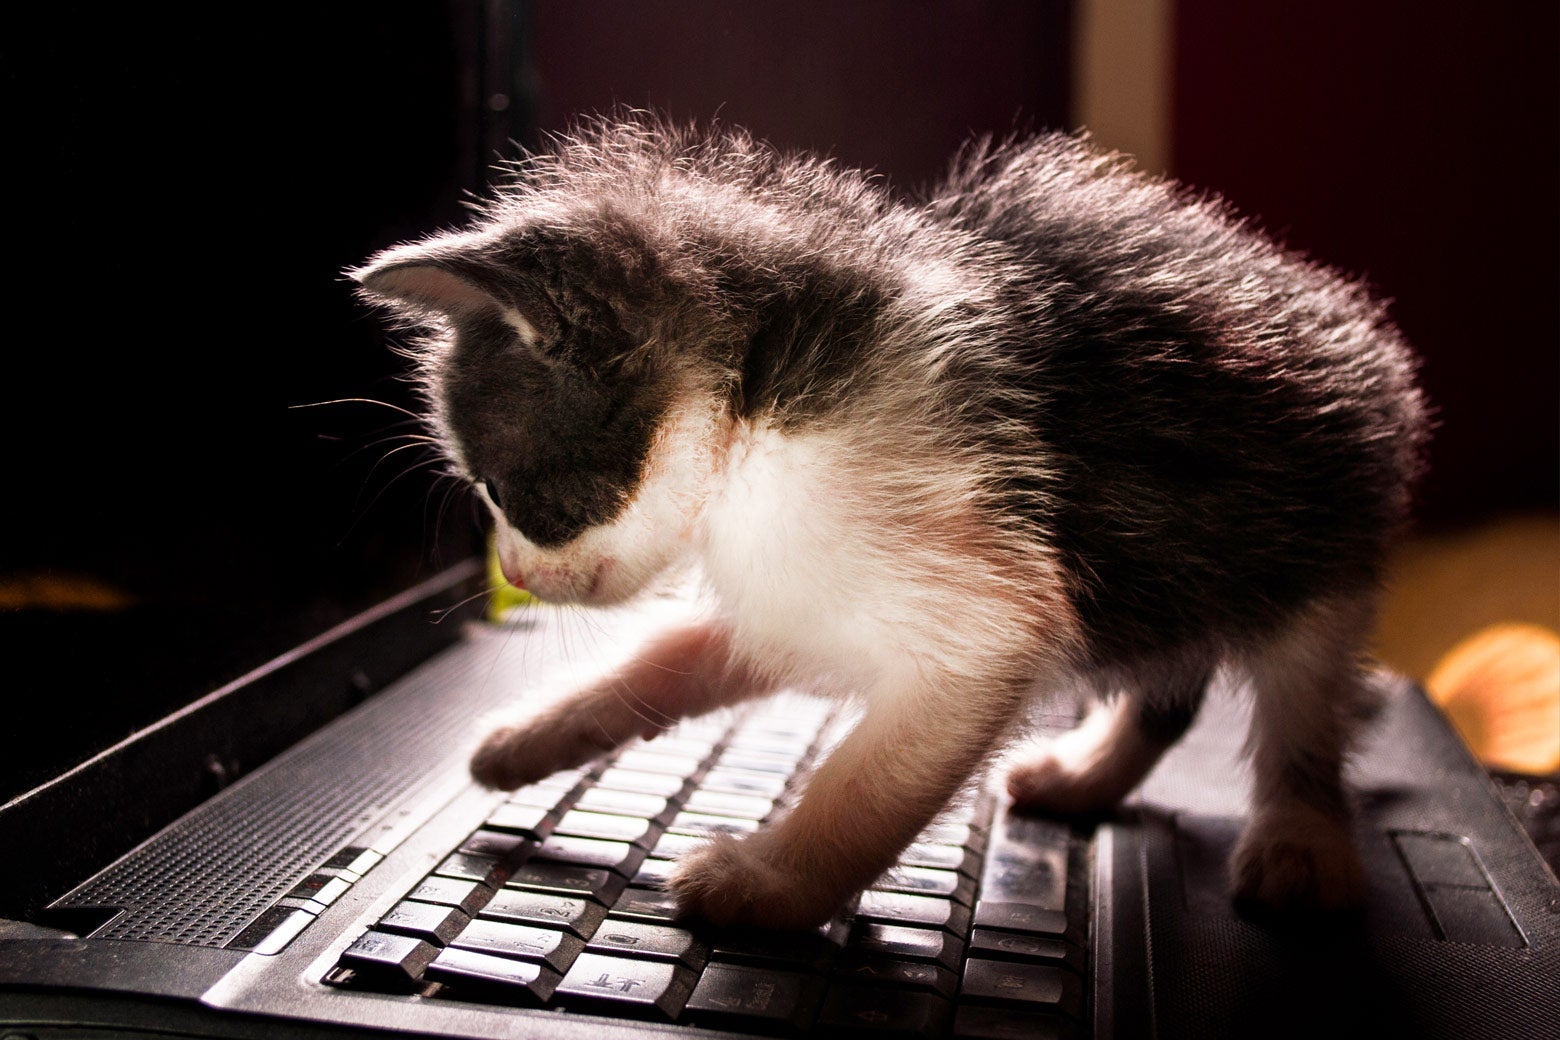 A kitten stands on the keyboard of a laptop.